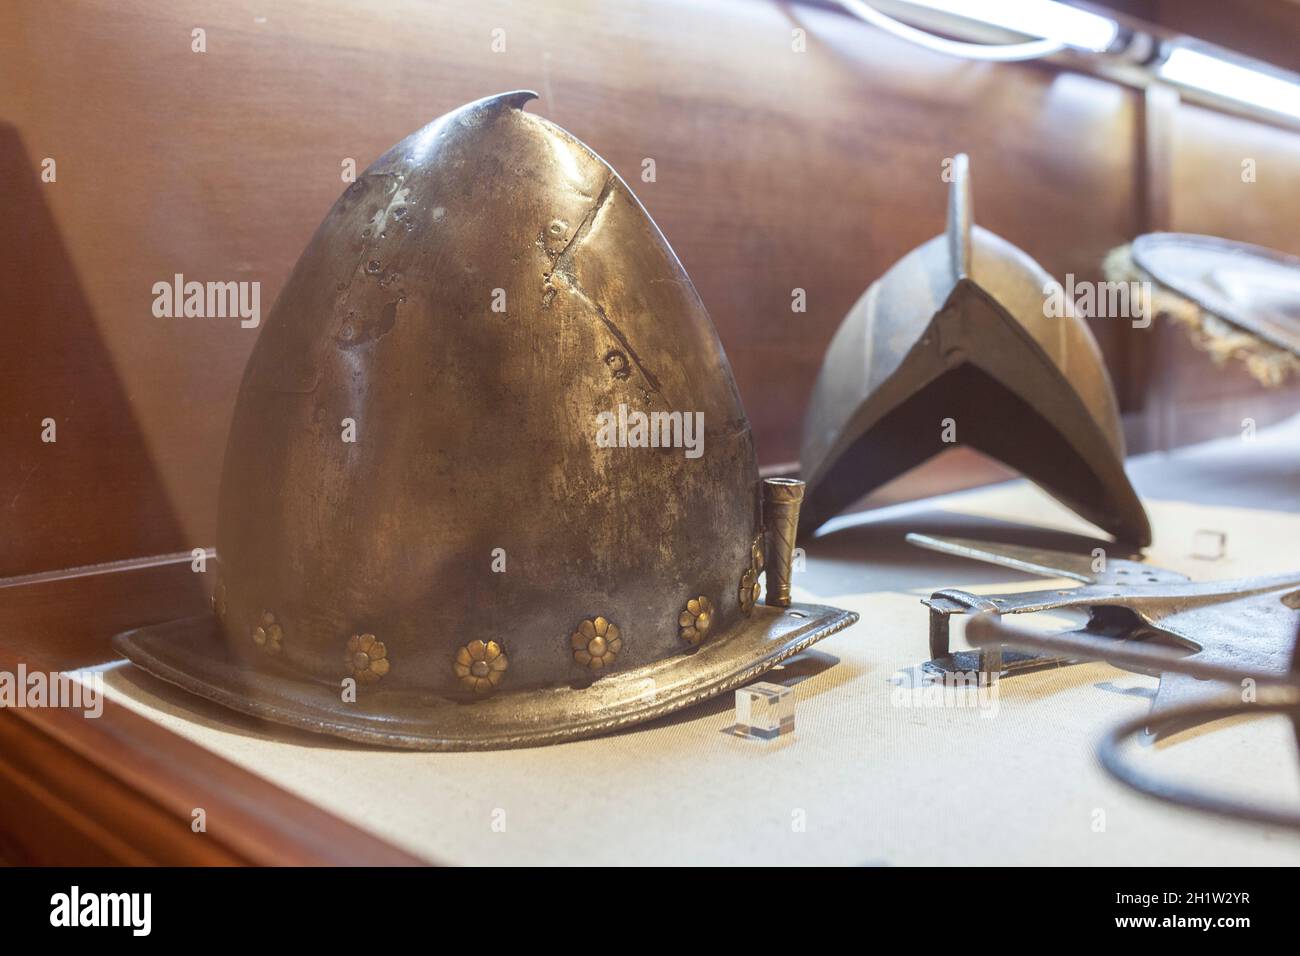 Madrid, Spain - March 6th, 2021: Spanish cabasset, 16h Century pointed helmet. Naval Museum of Madrid, Spain Stock Photo